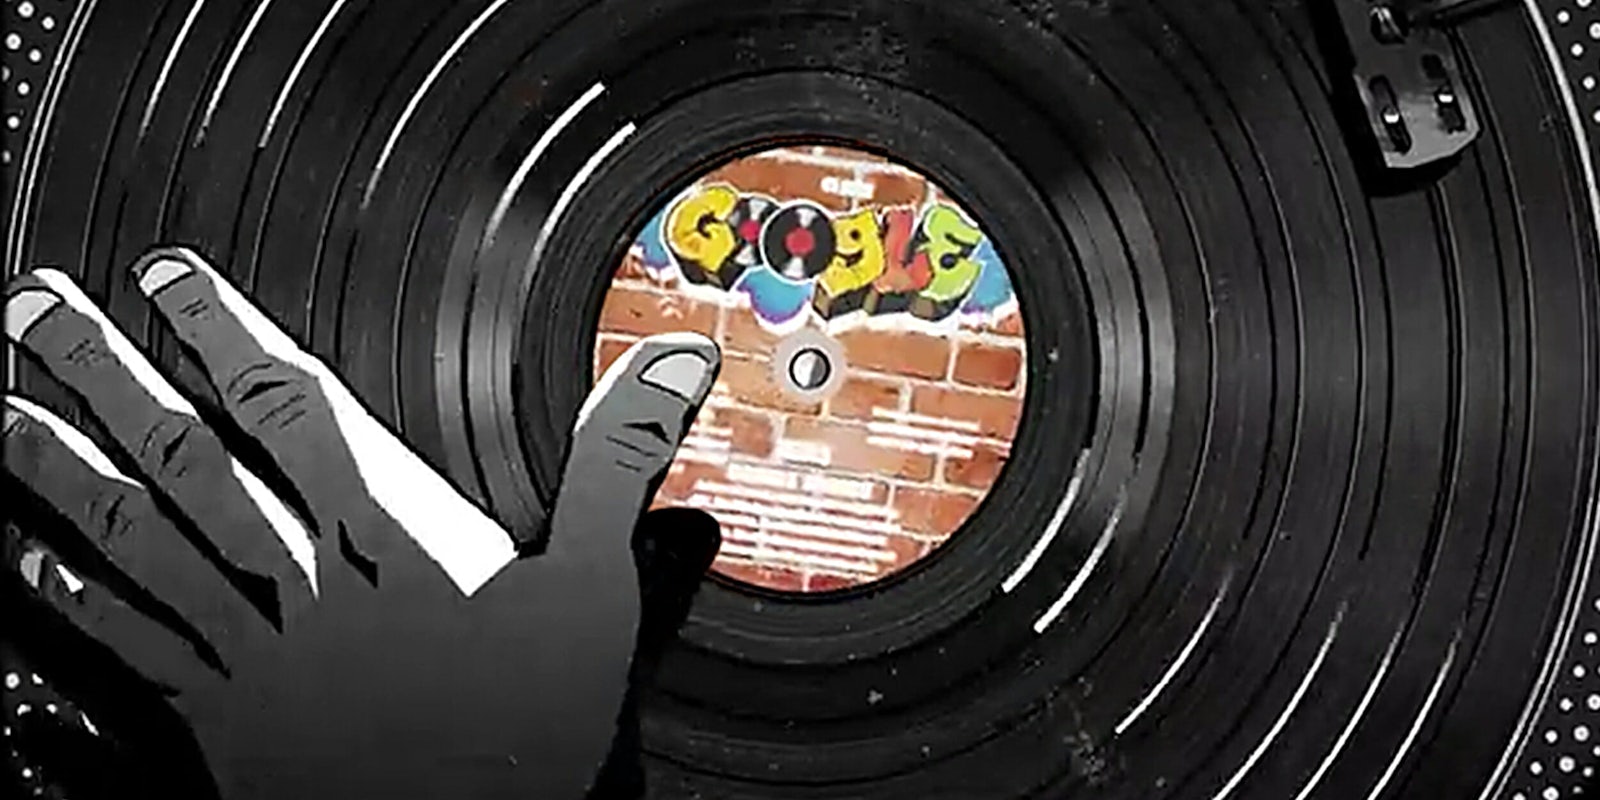 DJ hand scratching a Google album on a turntable